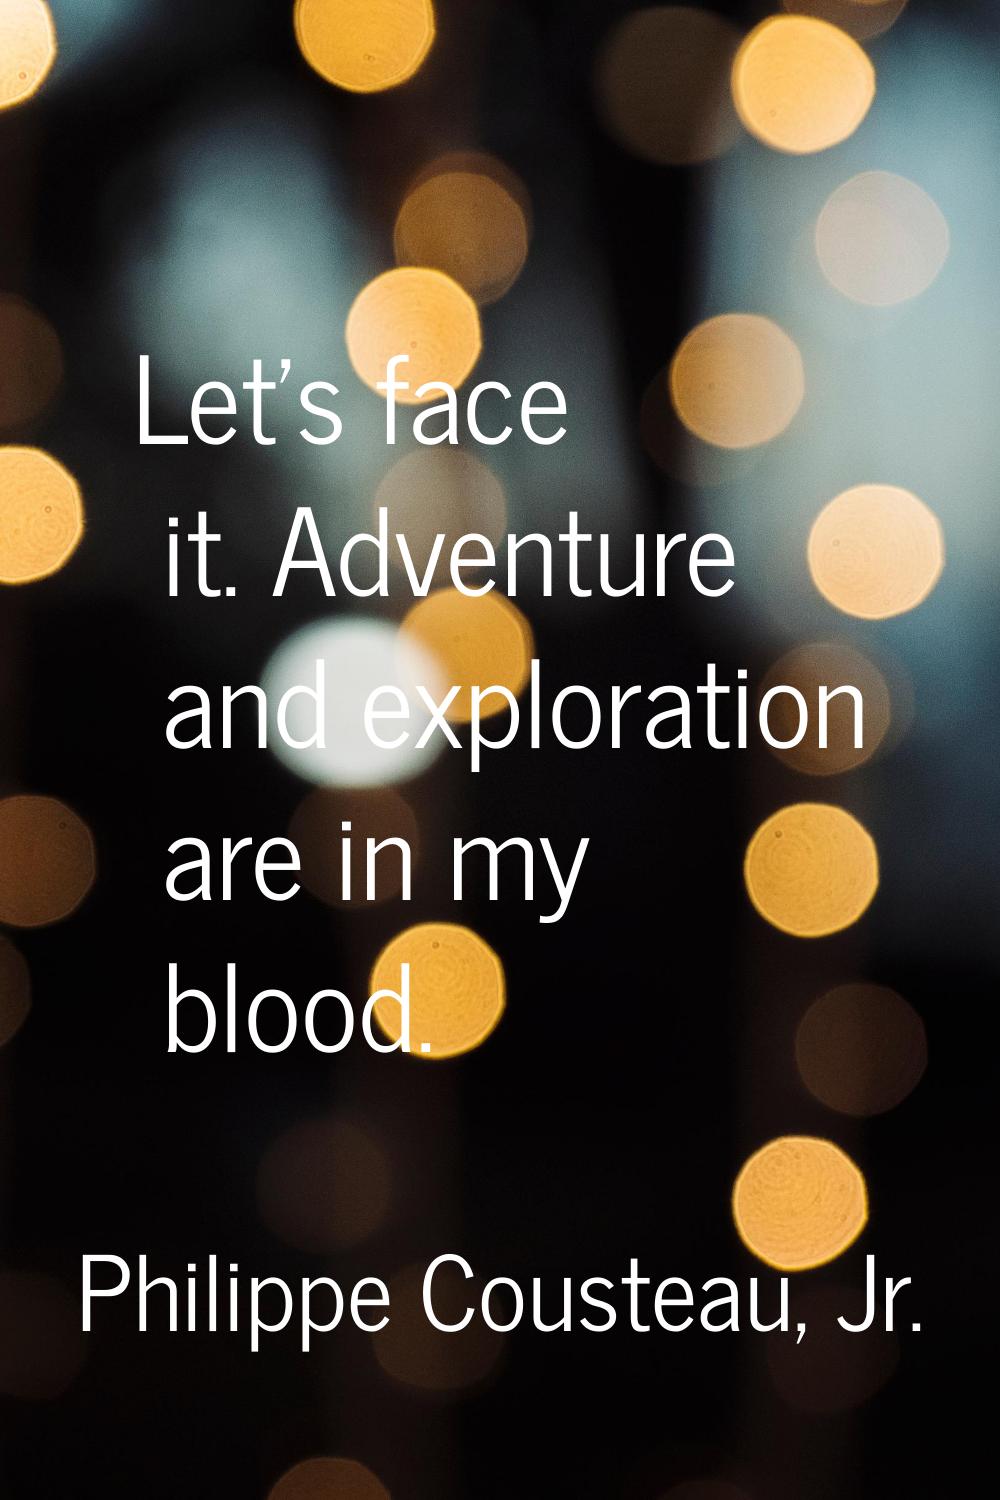 Let's face it. Adventure and exploration are in my blood.